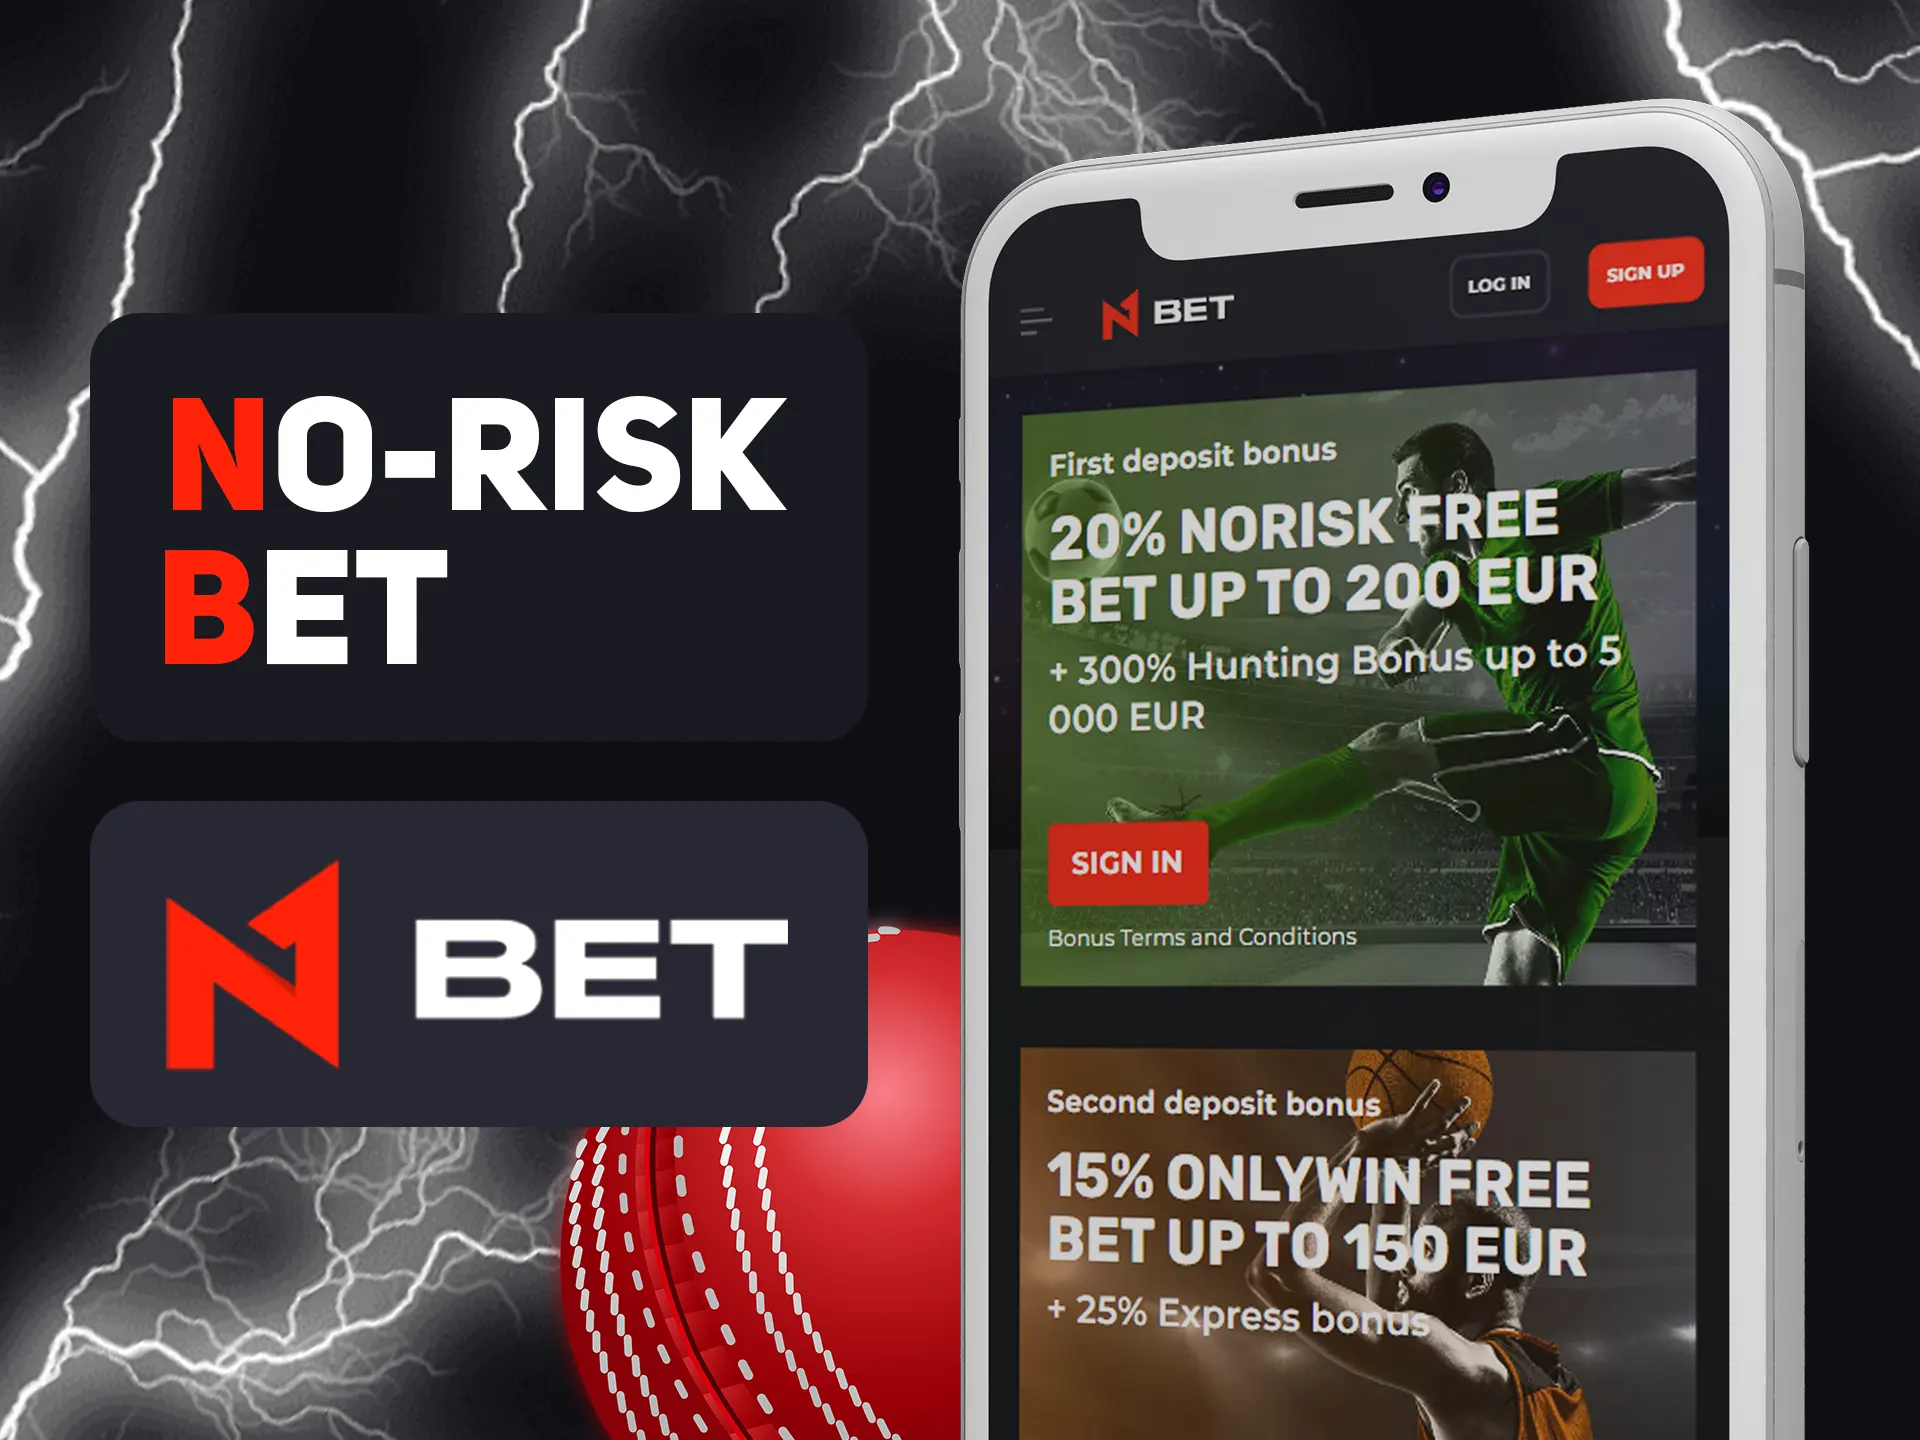 Make winning bets with special N1bet promotion.